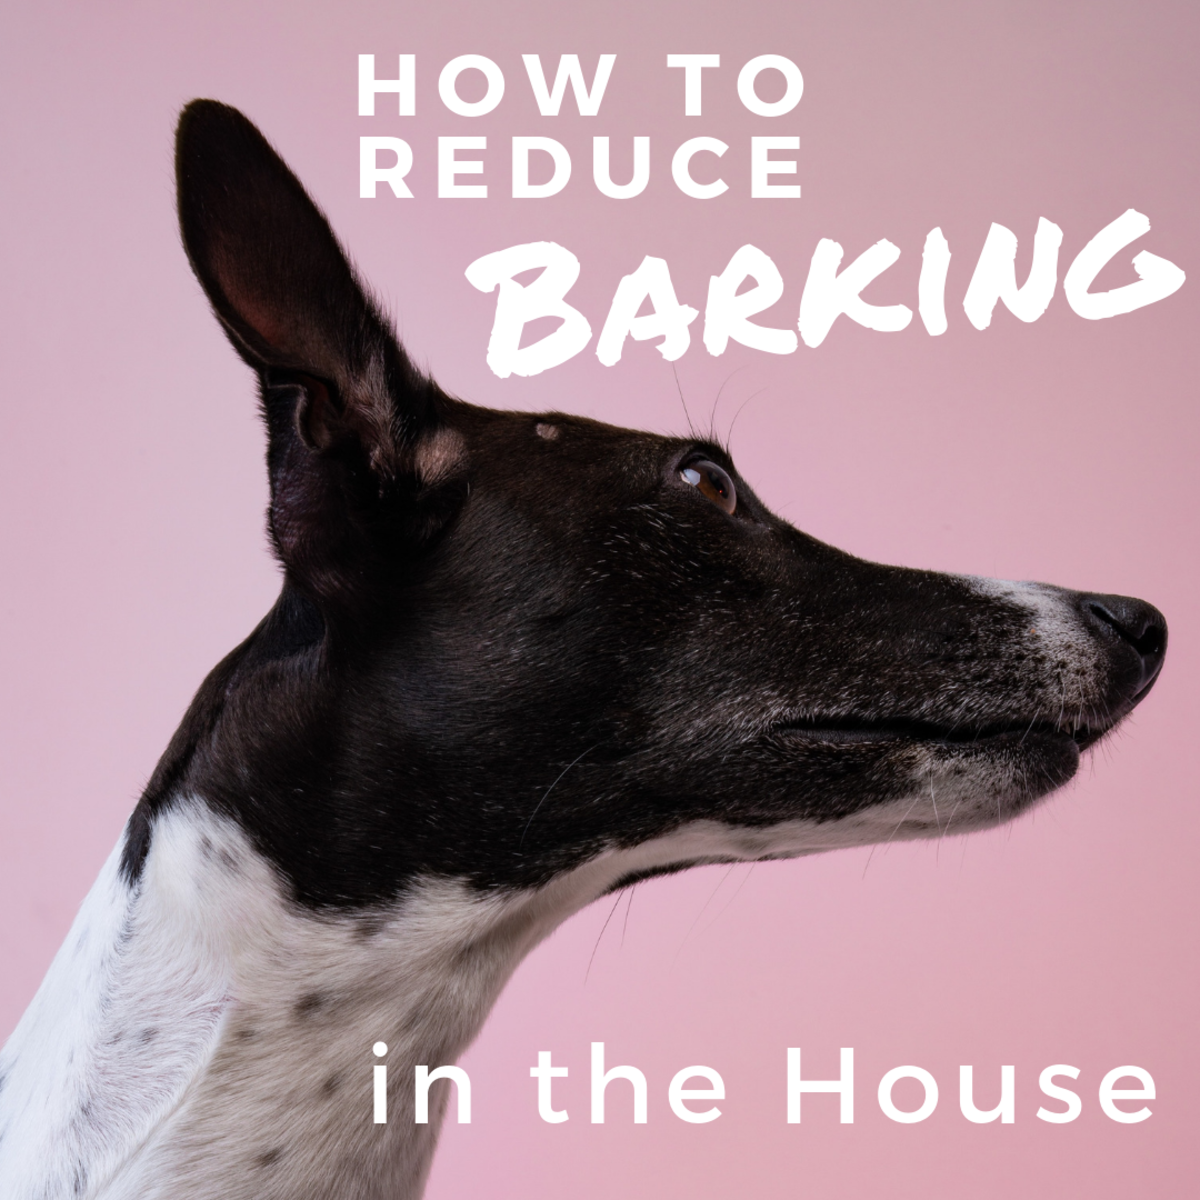 There steps you can take to try to reduce your dog's barking at home.
